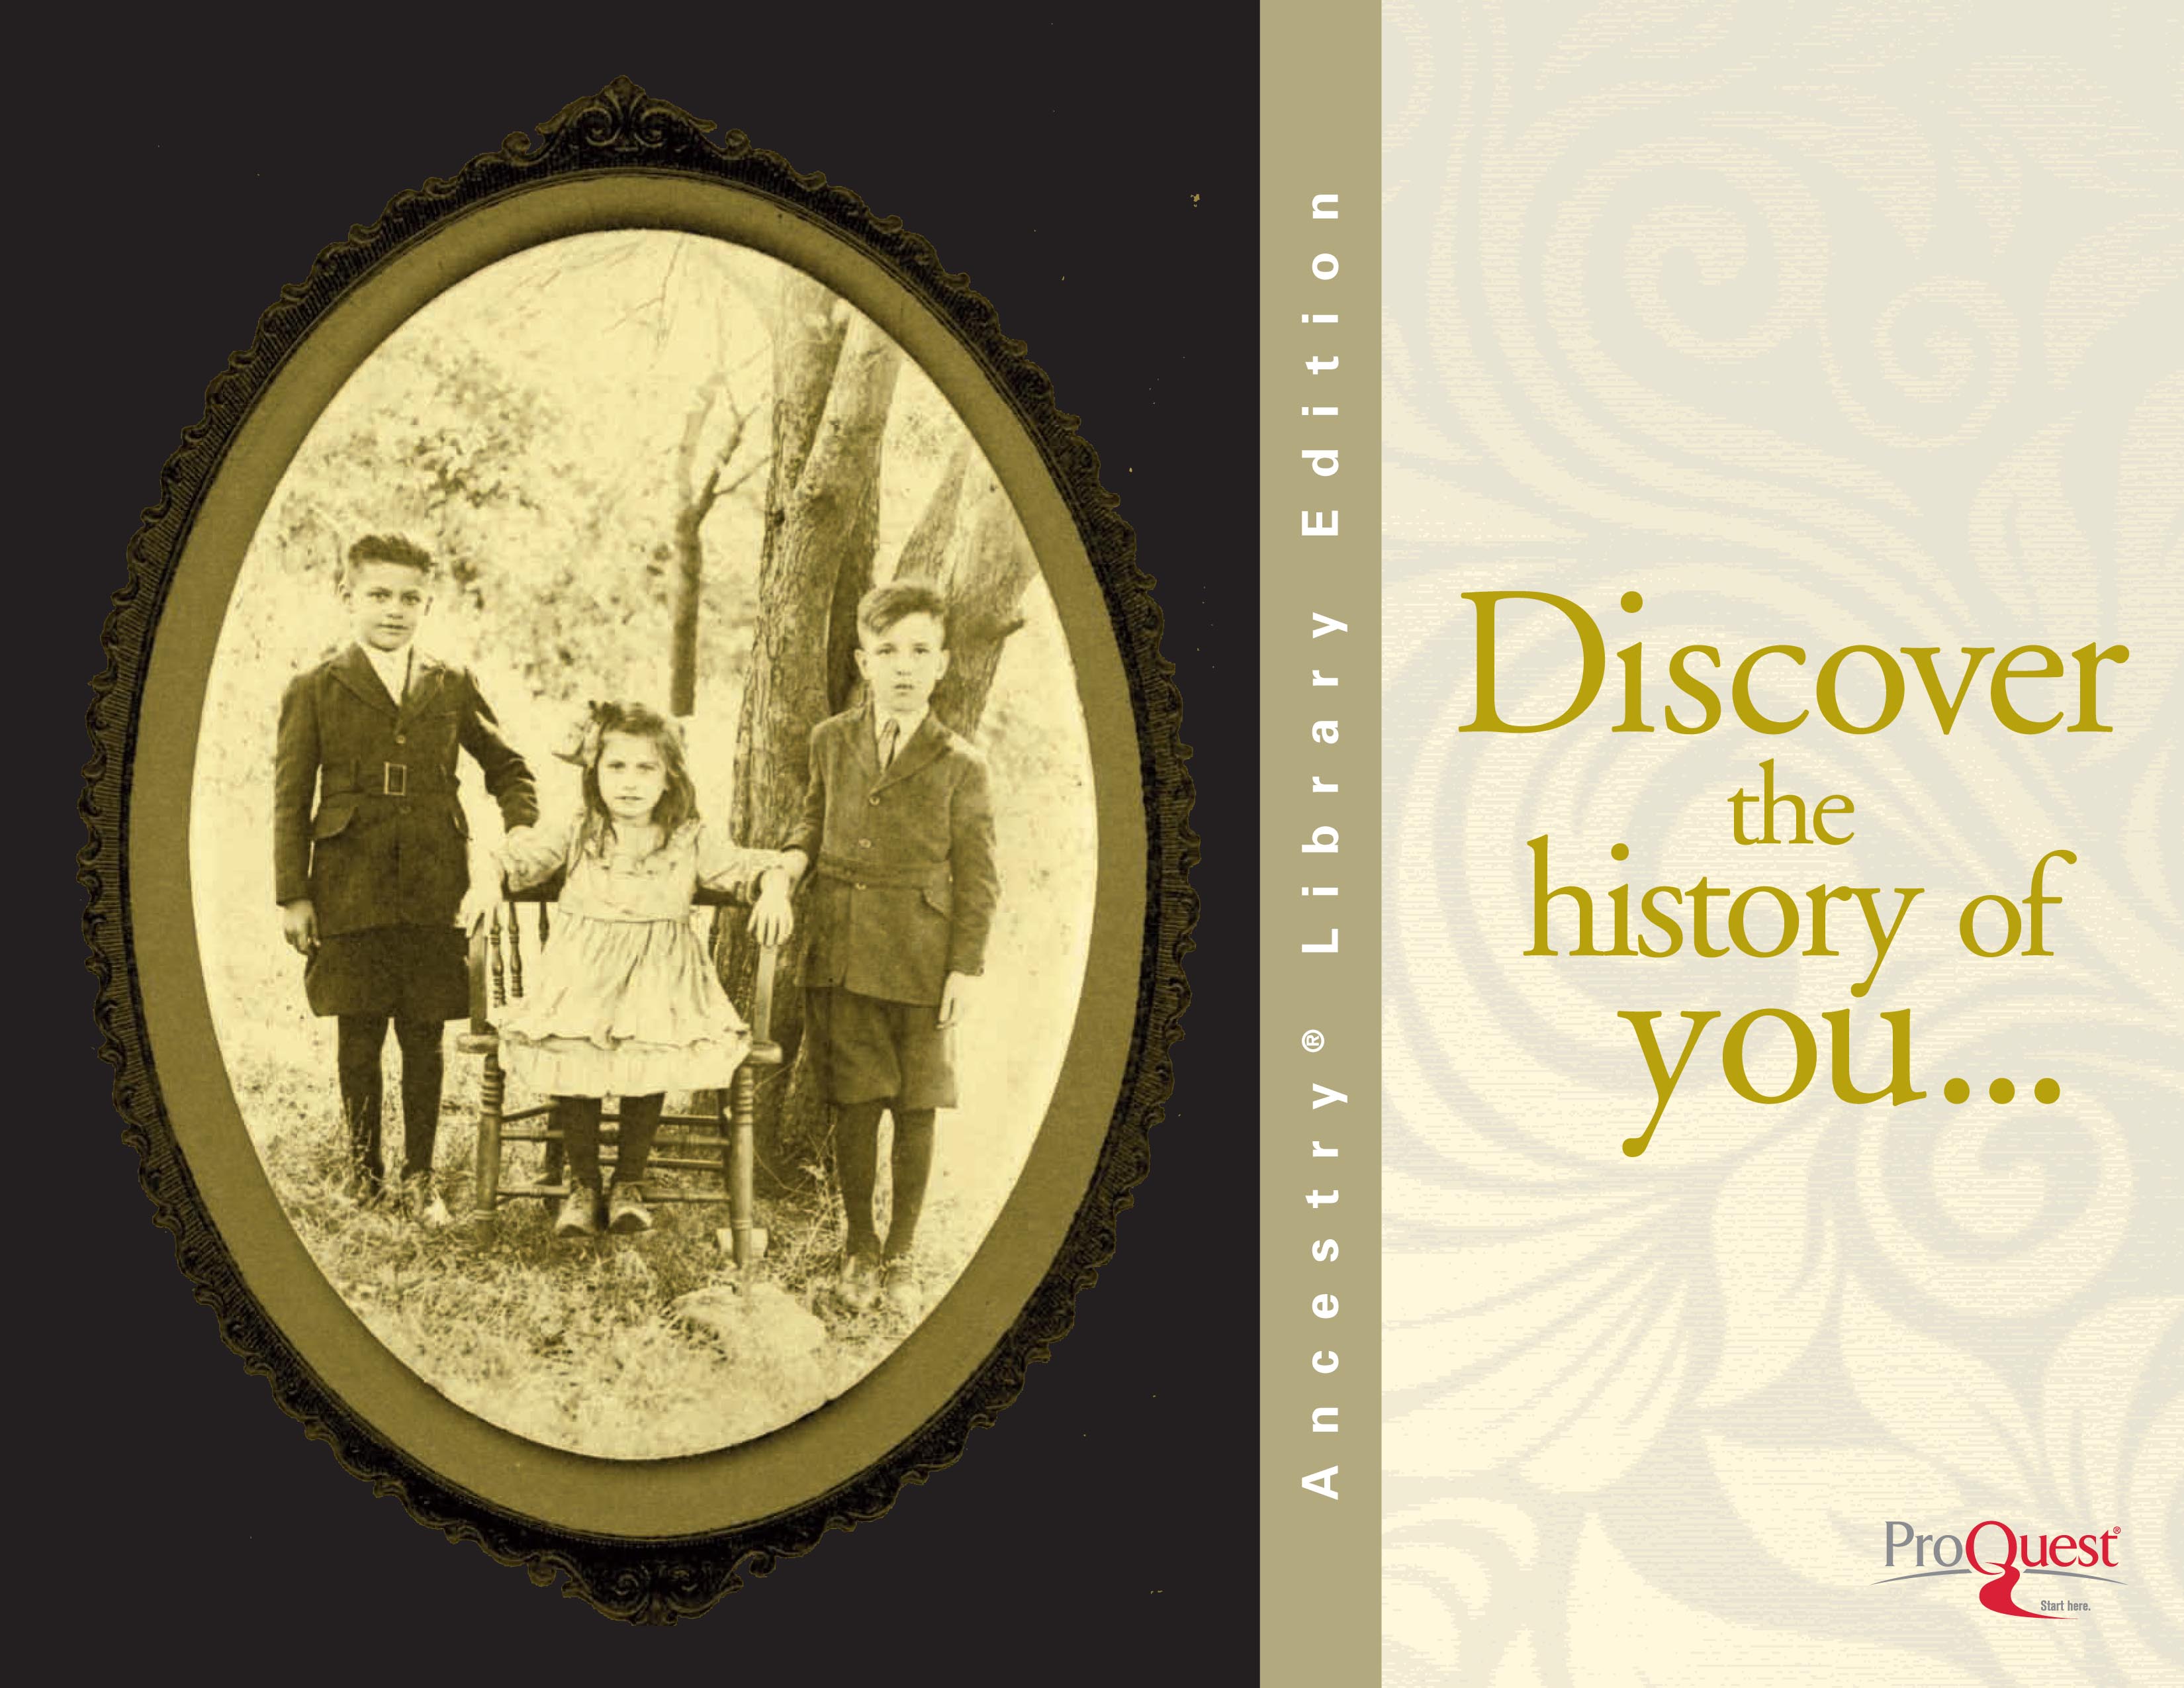 Old timey picture with text "Discover the History of You"